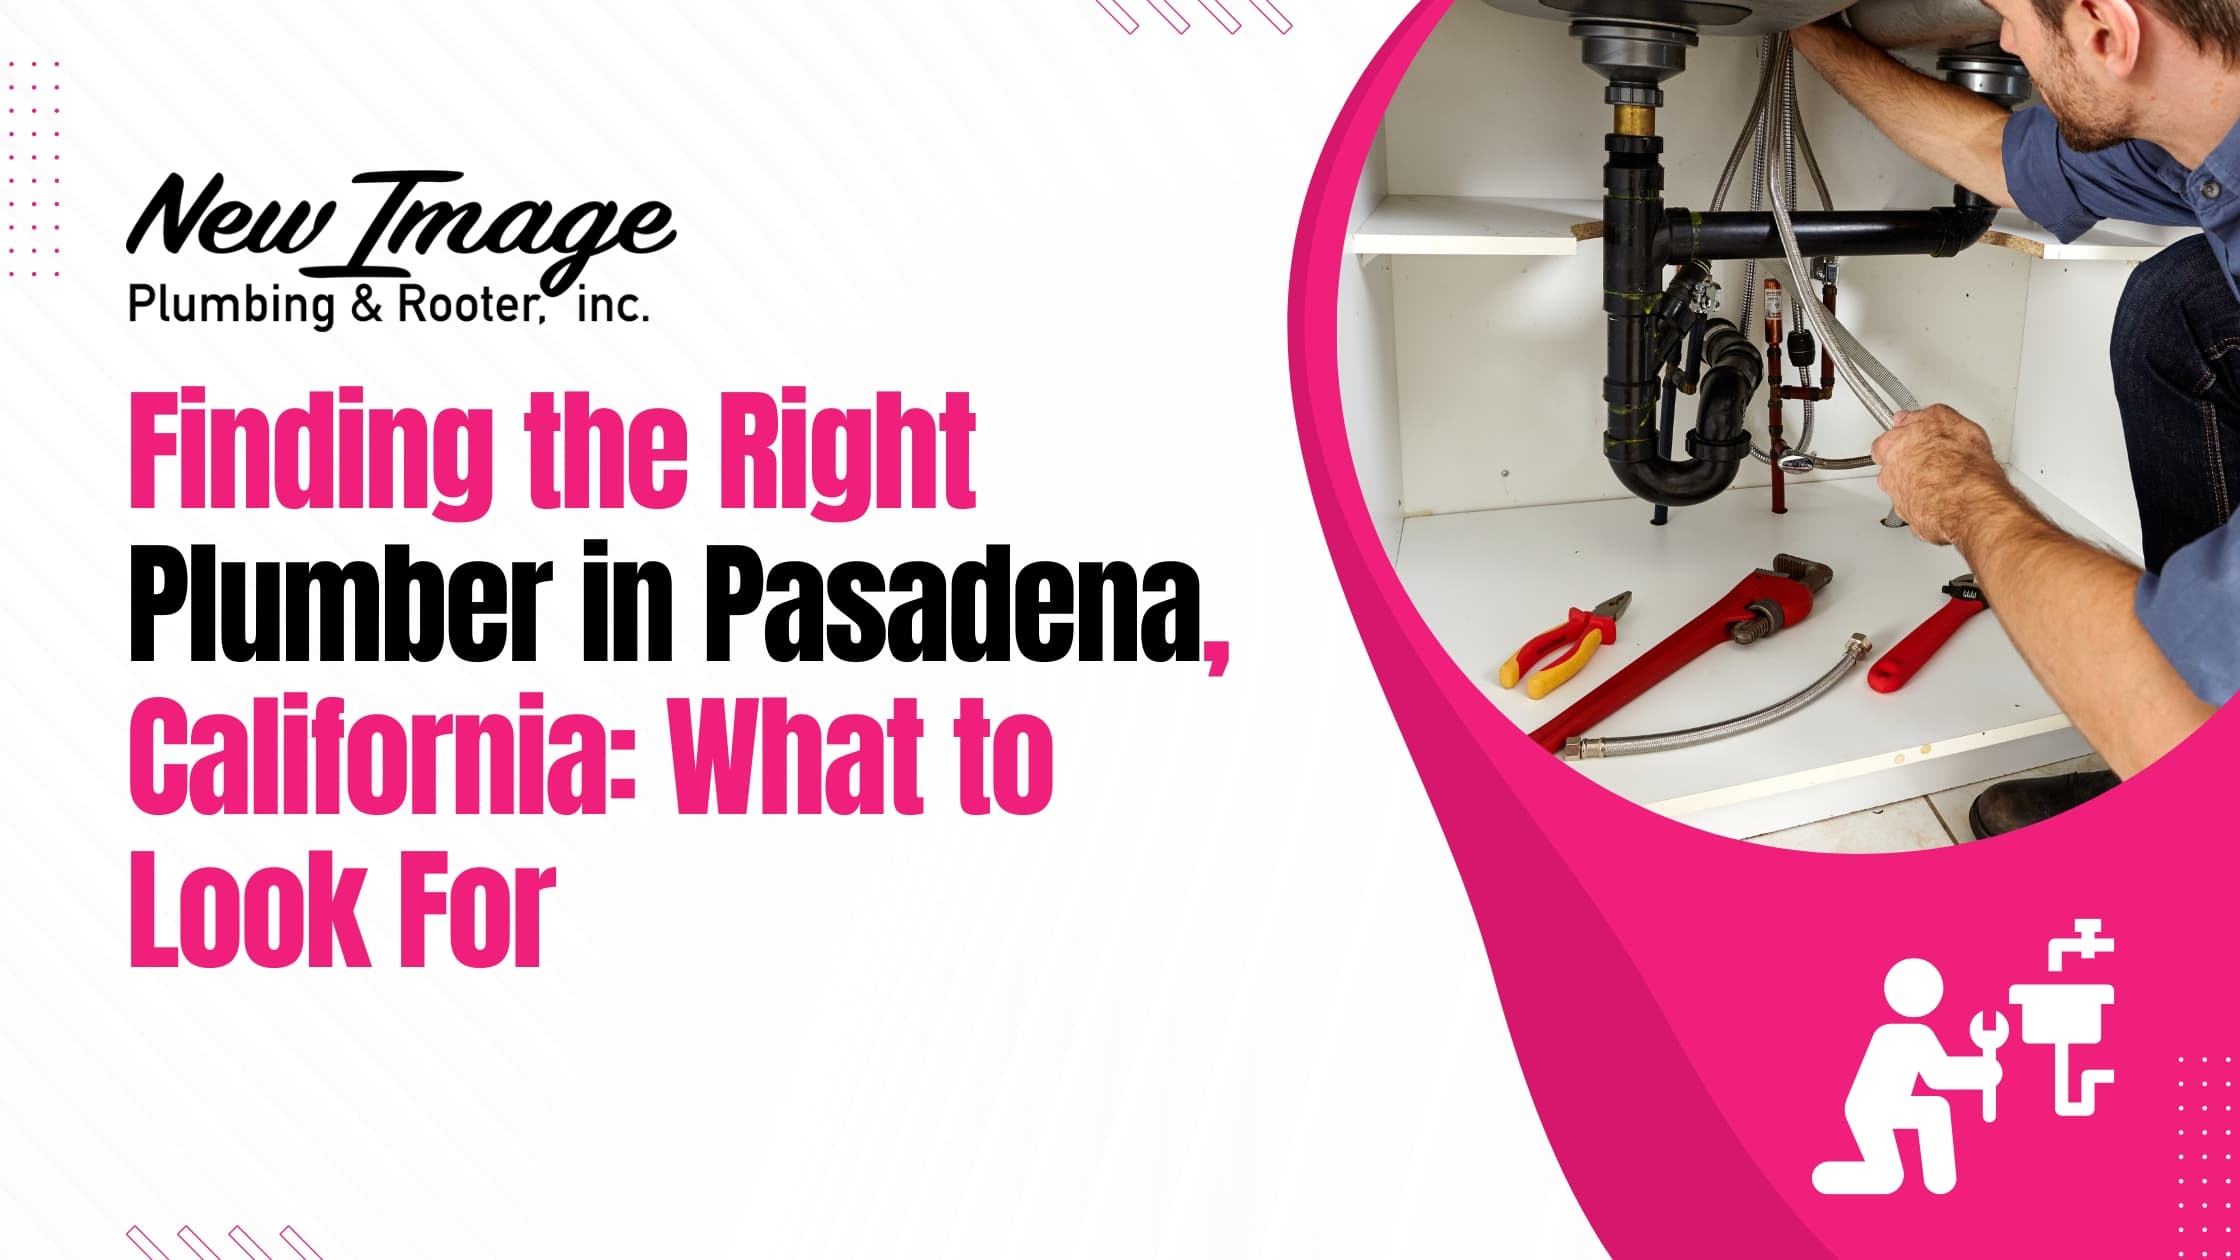 Finding the Right Plumber in Pasadena, California